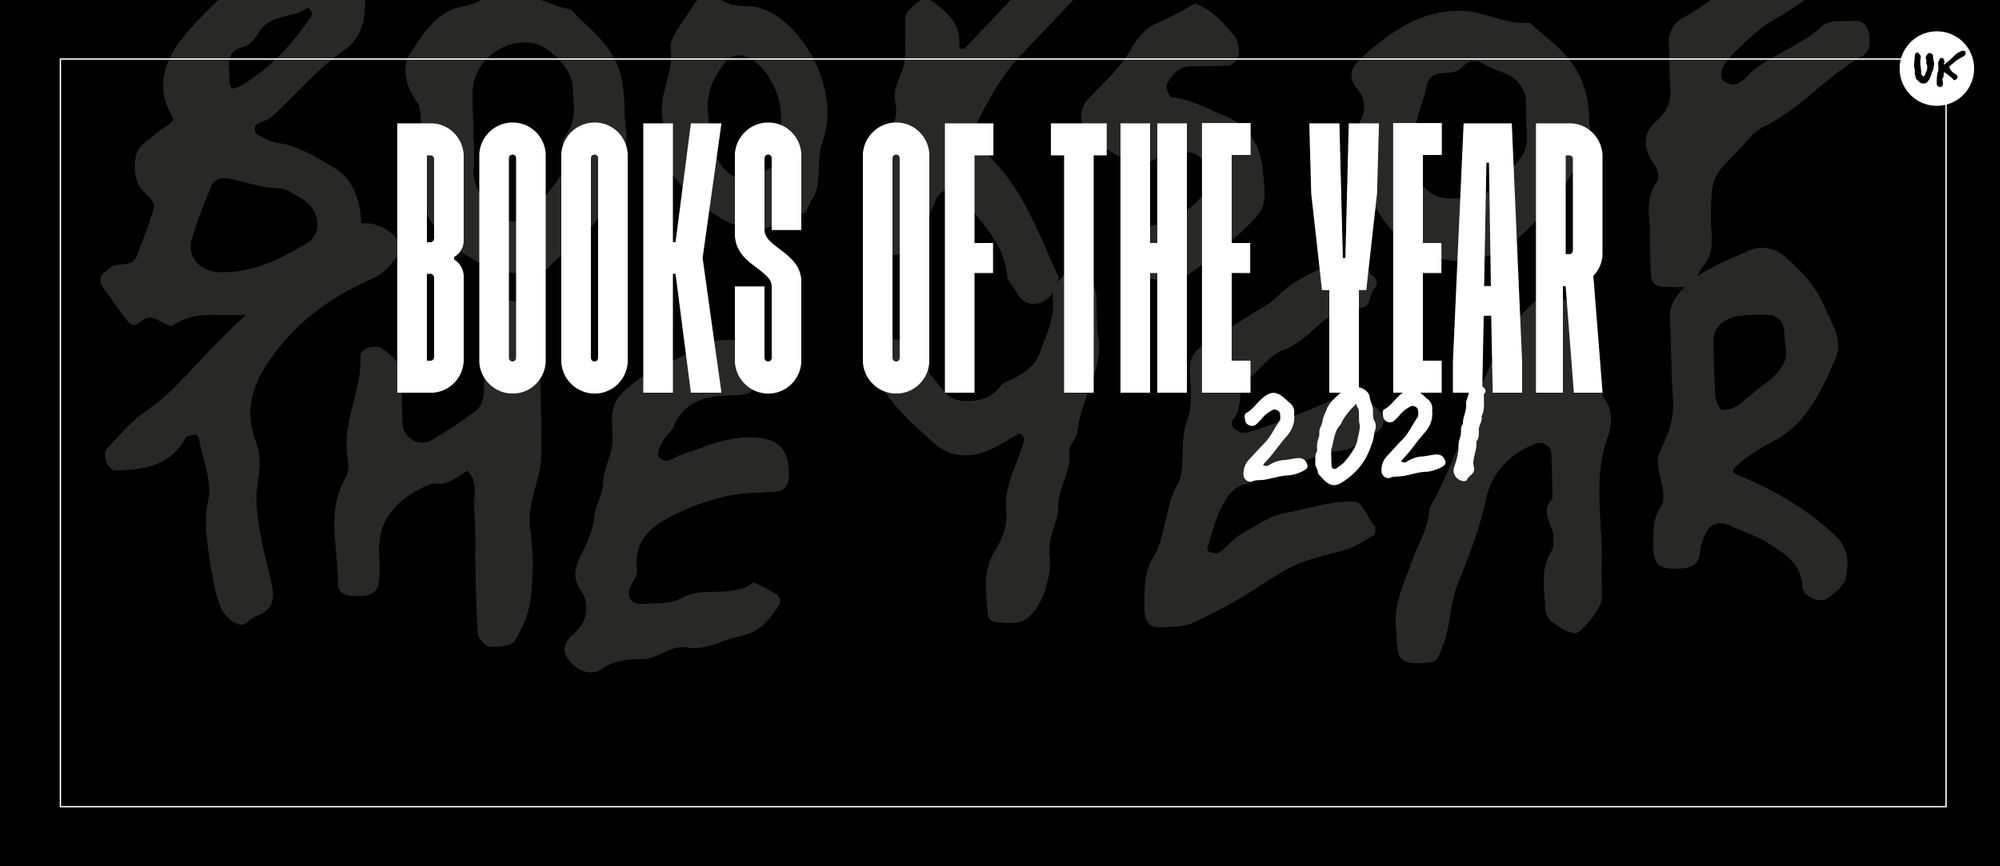 UK Books of the Year 2021